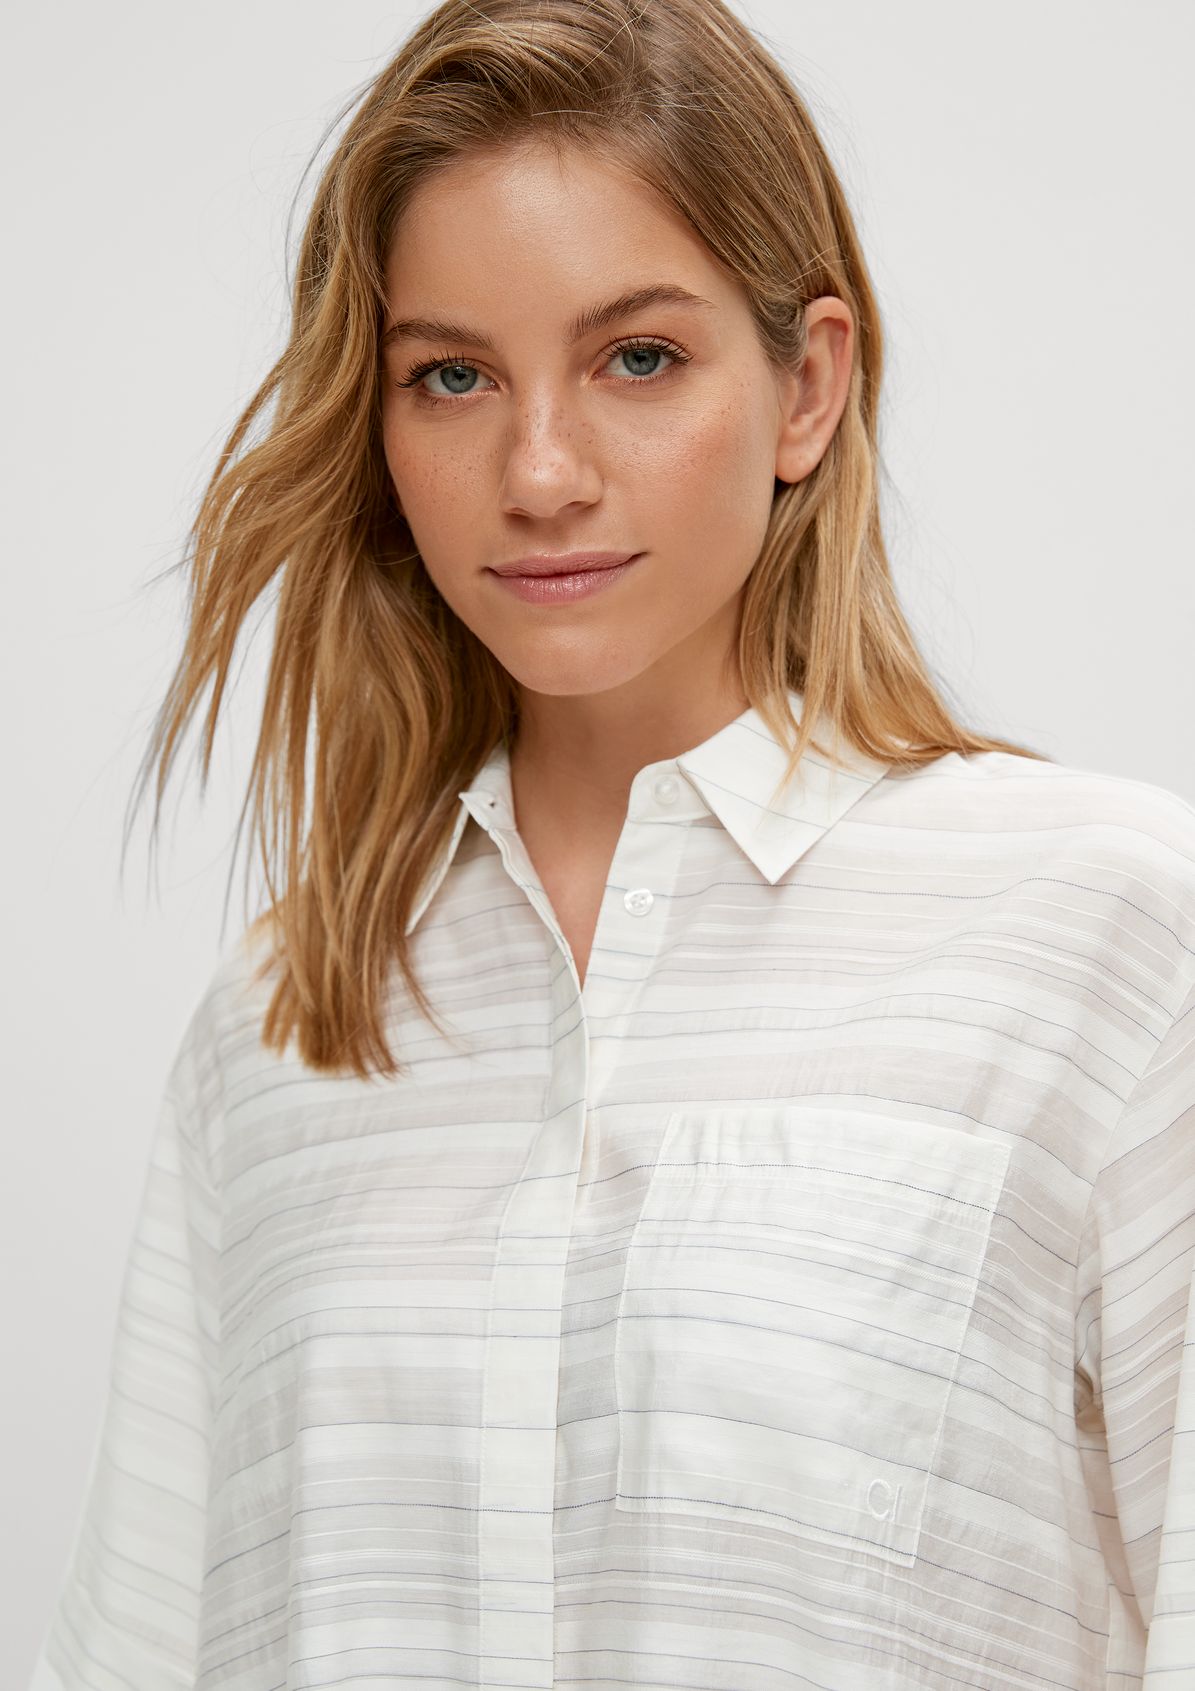 Shirt blouse with stripes from comma